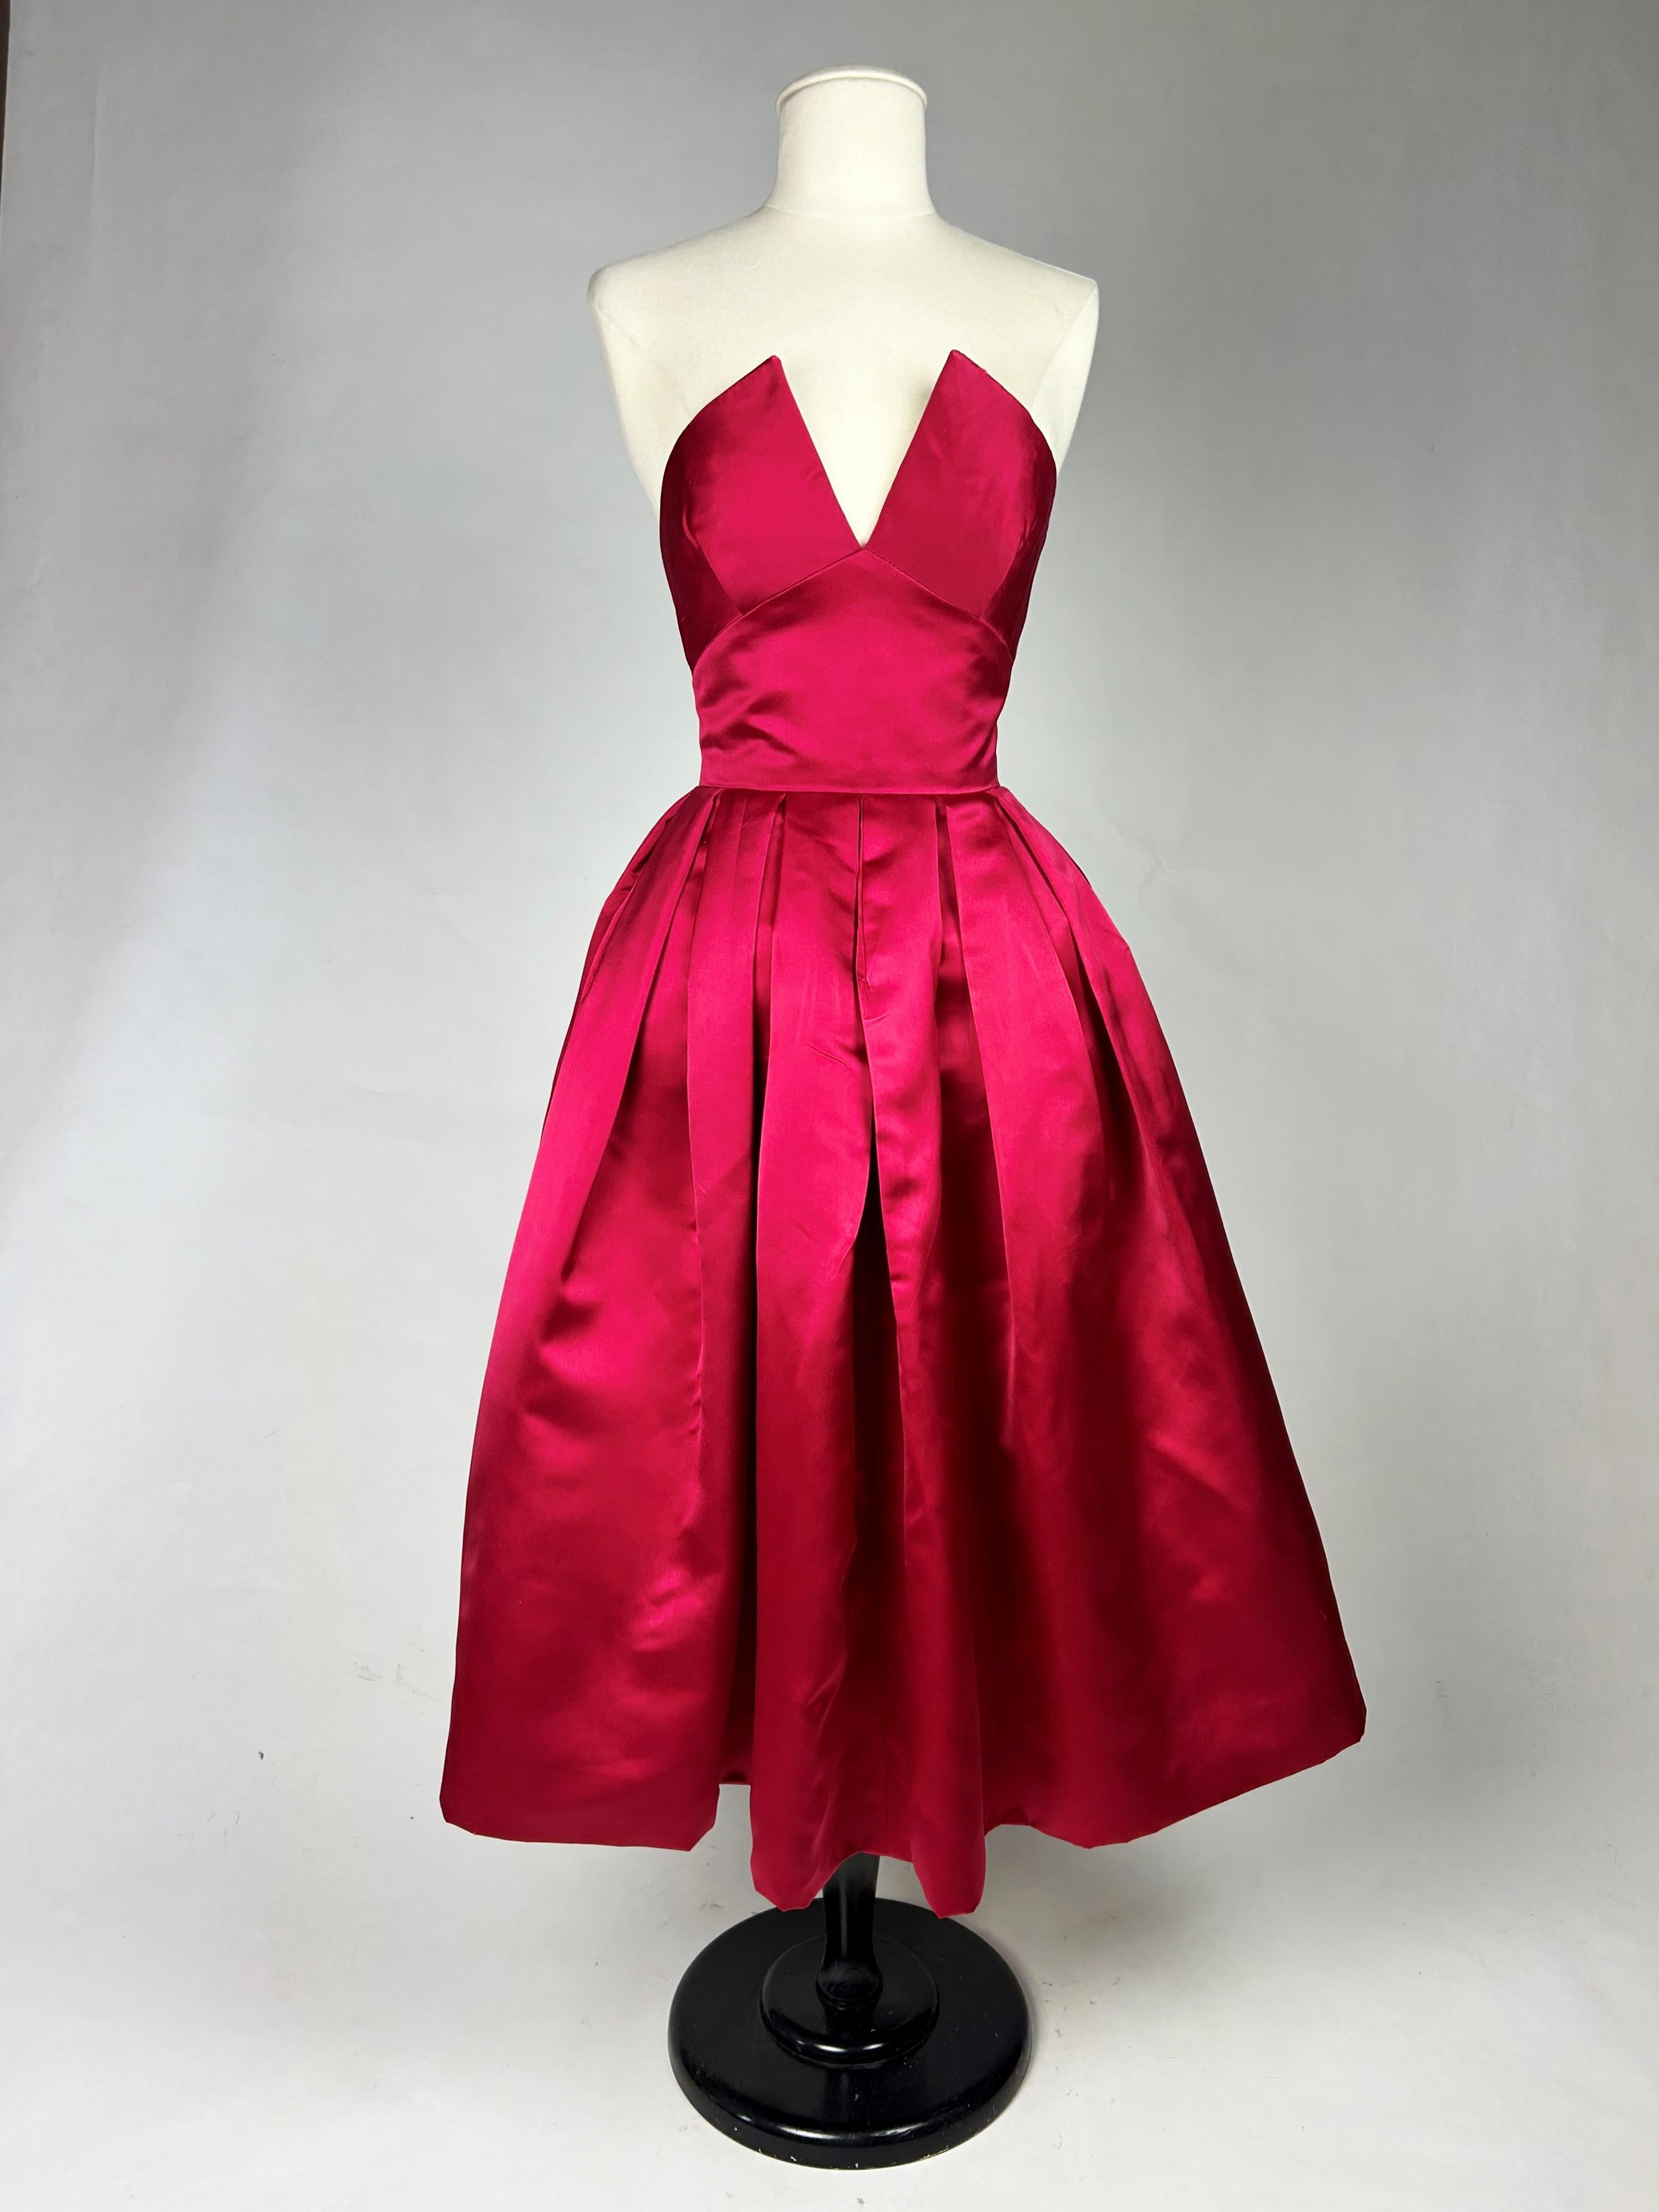 Women's Cocktail dress in raspberry satin in the style of Christian Dior - Paris C. 1955